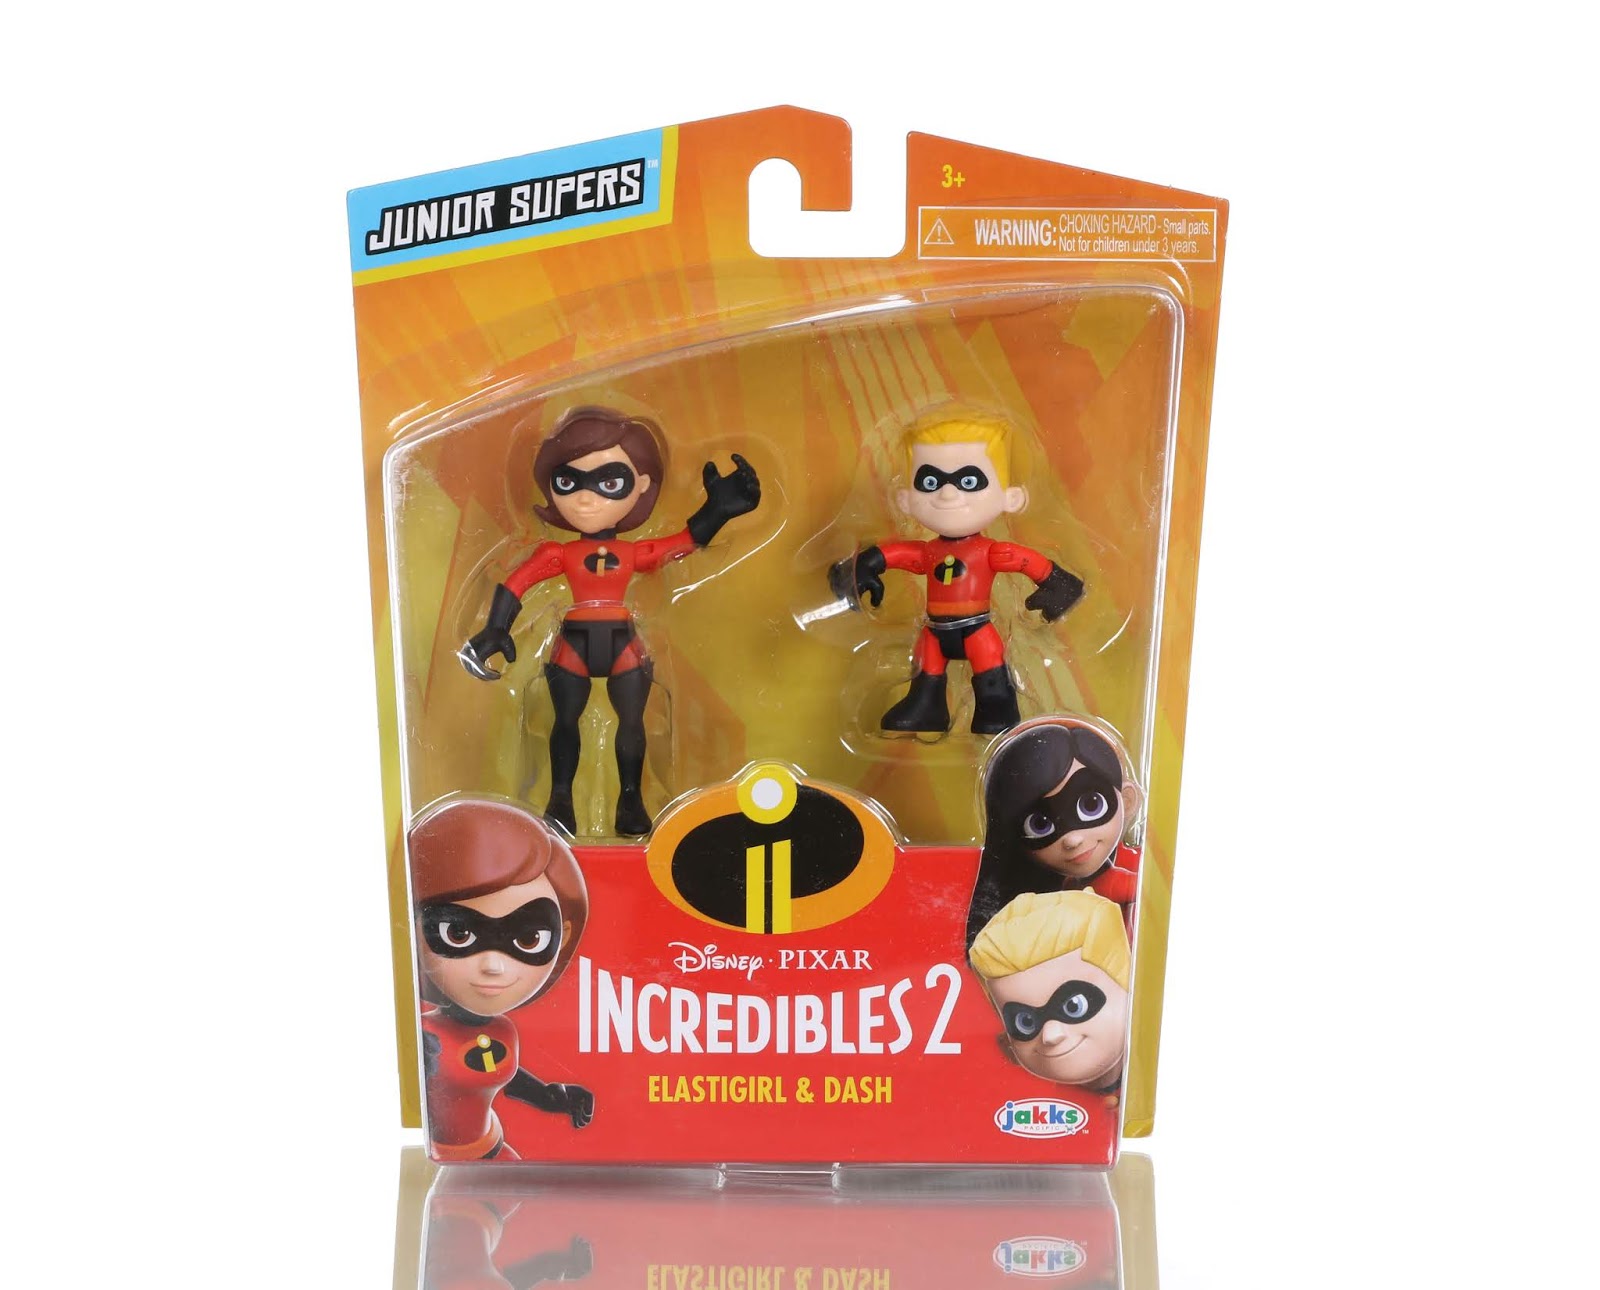 Incredibles 2  "Junior Supers" Figure Collection